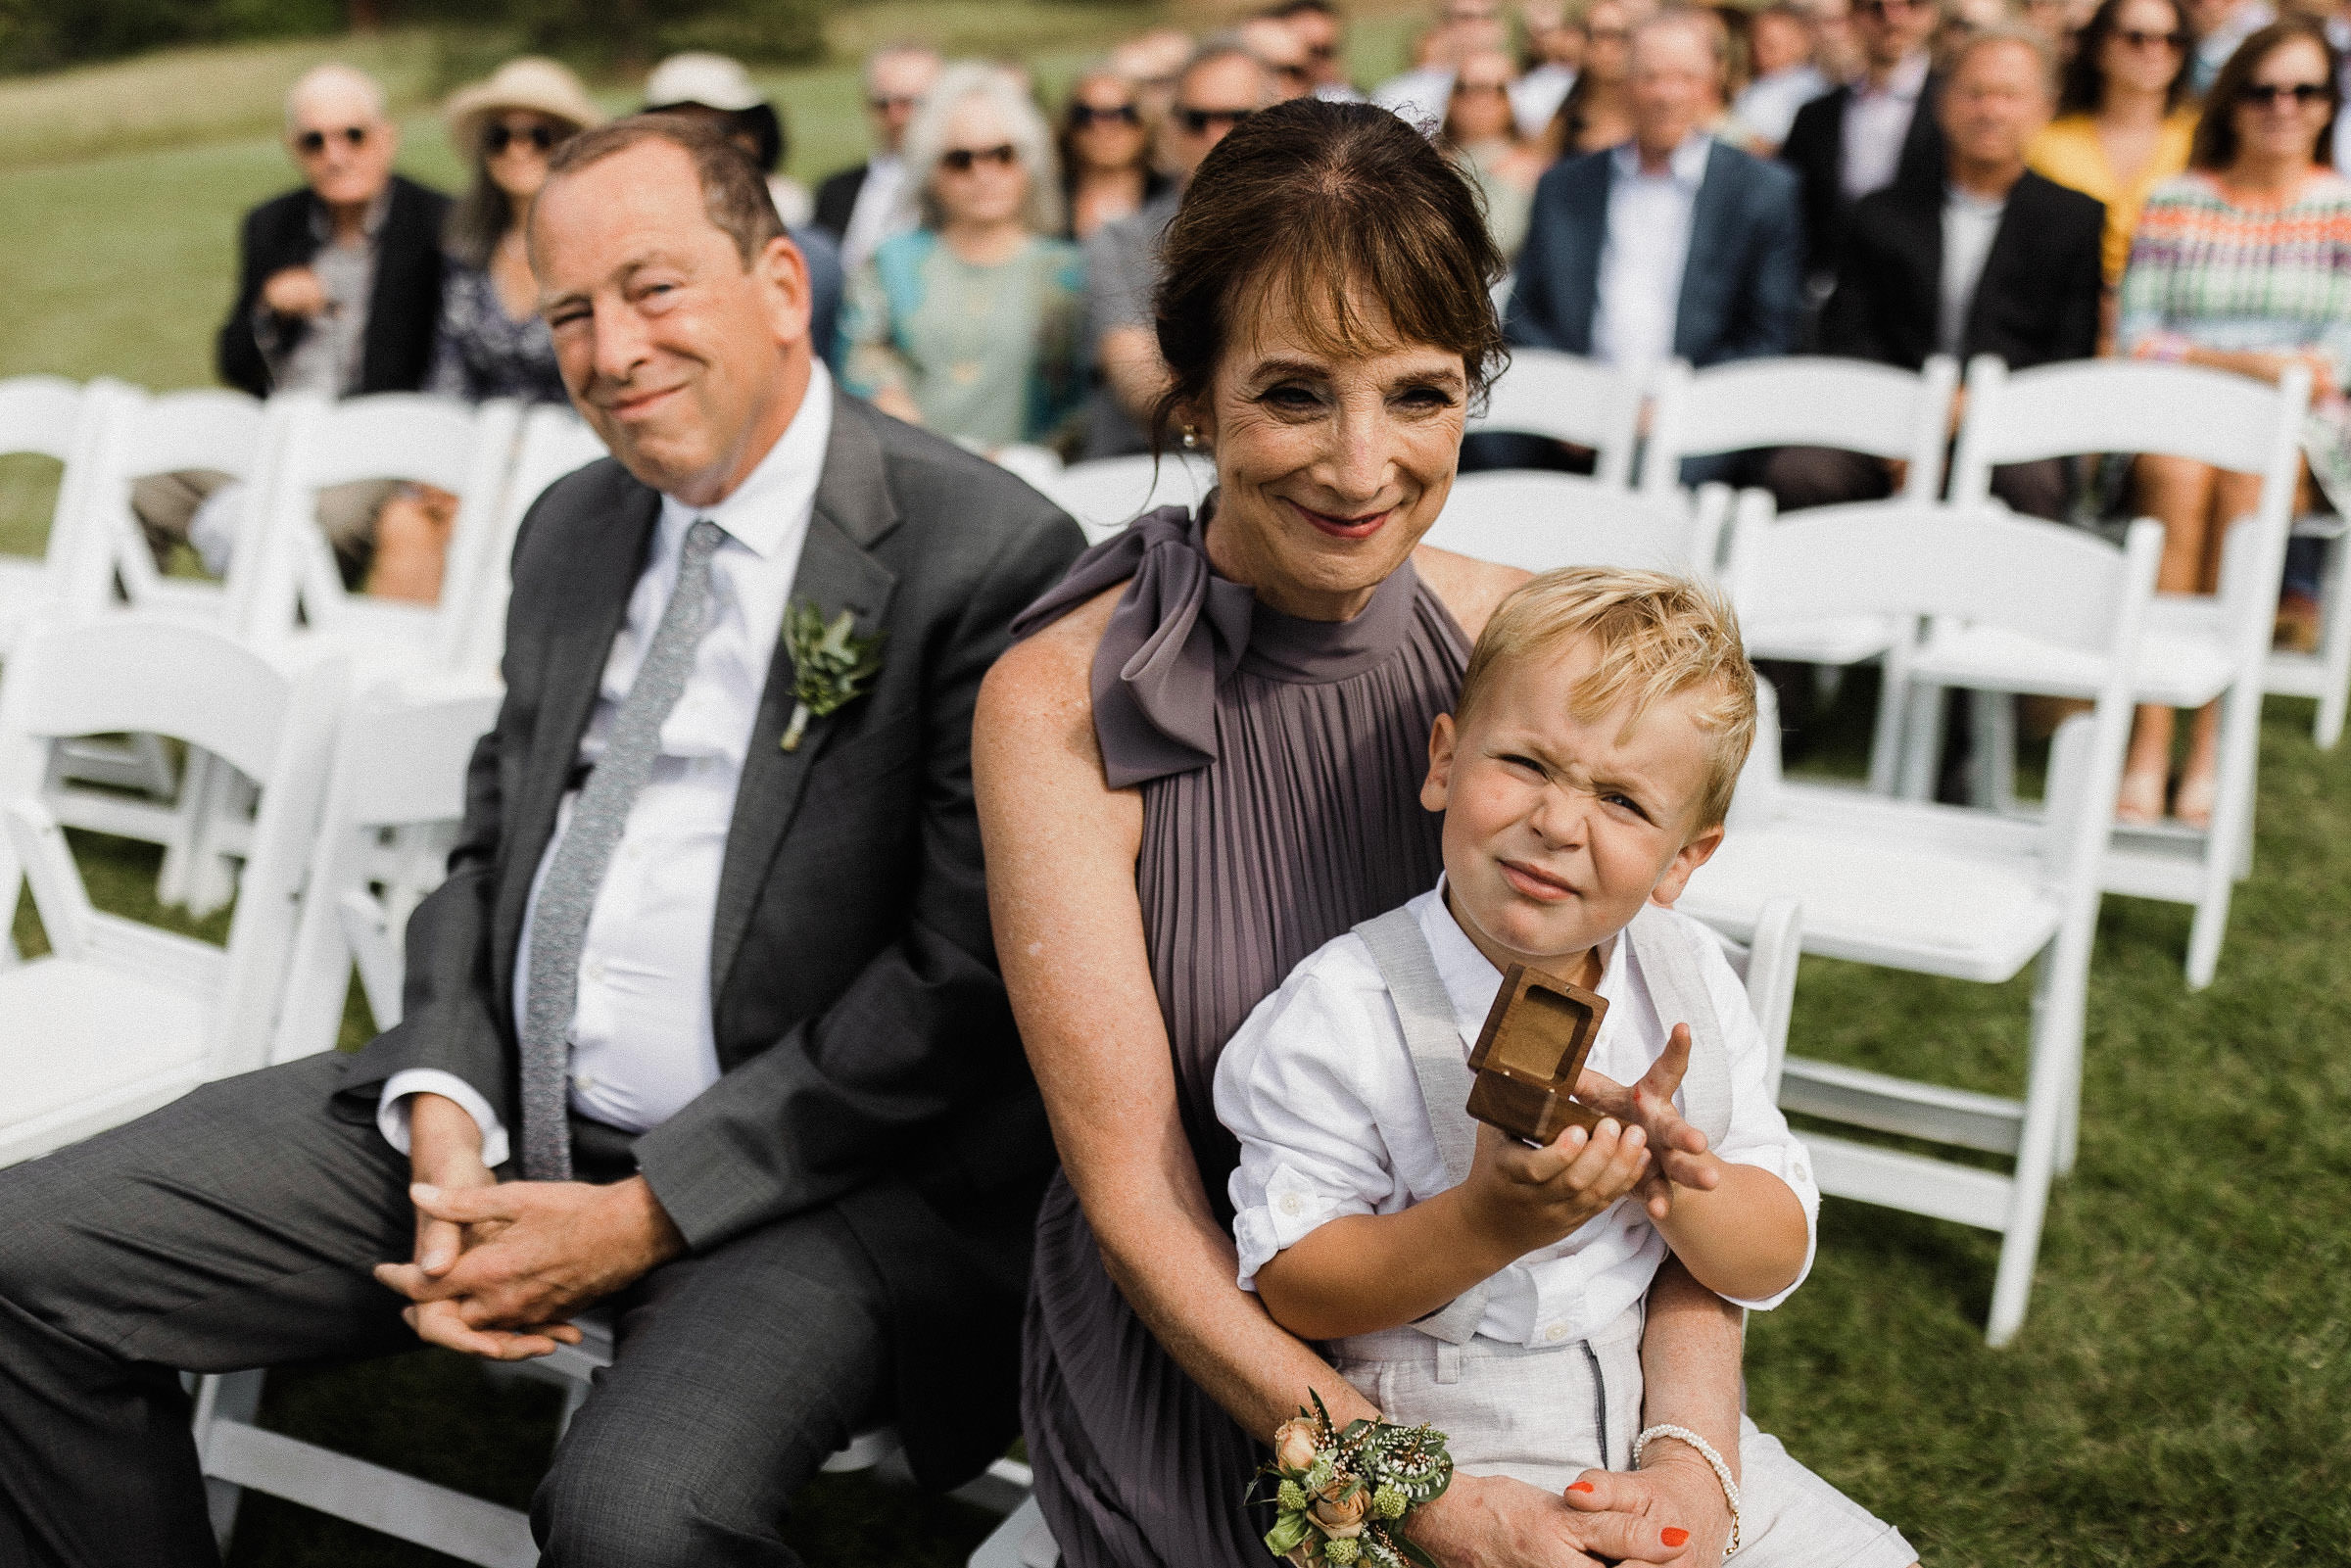 Groom's mom, dad, and nephew smile during ceremony